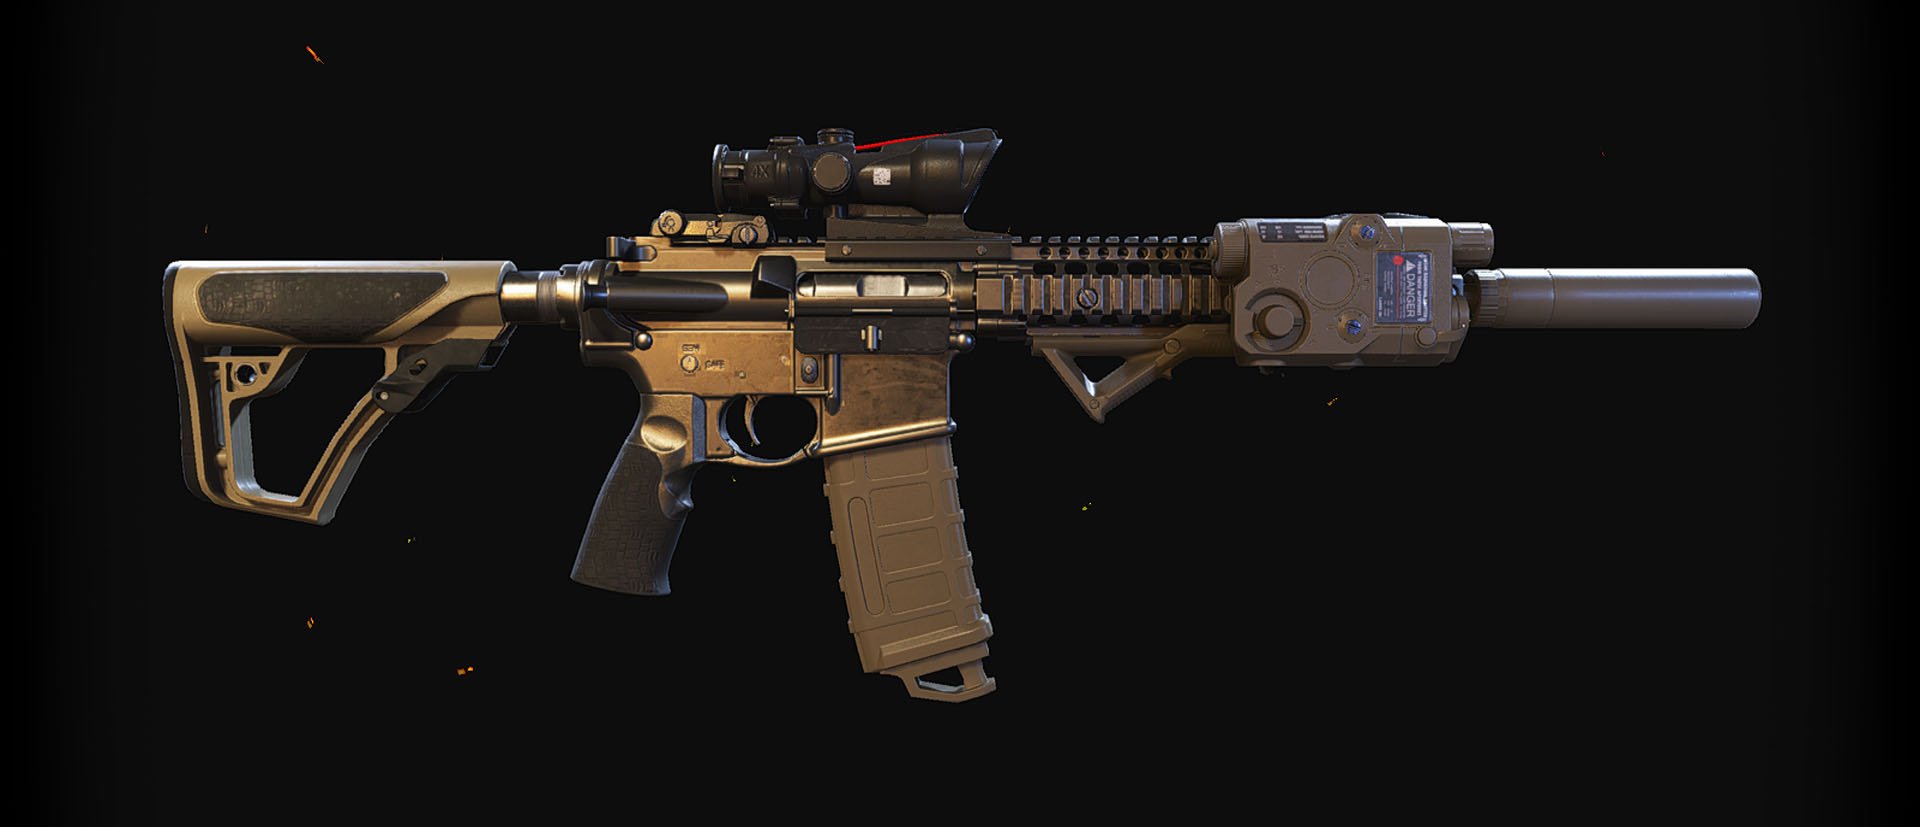 MK18 rifle from Ghost Recon Wildlands